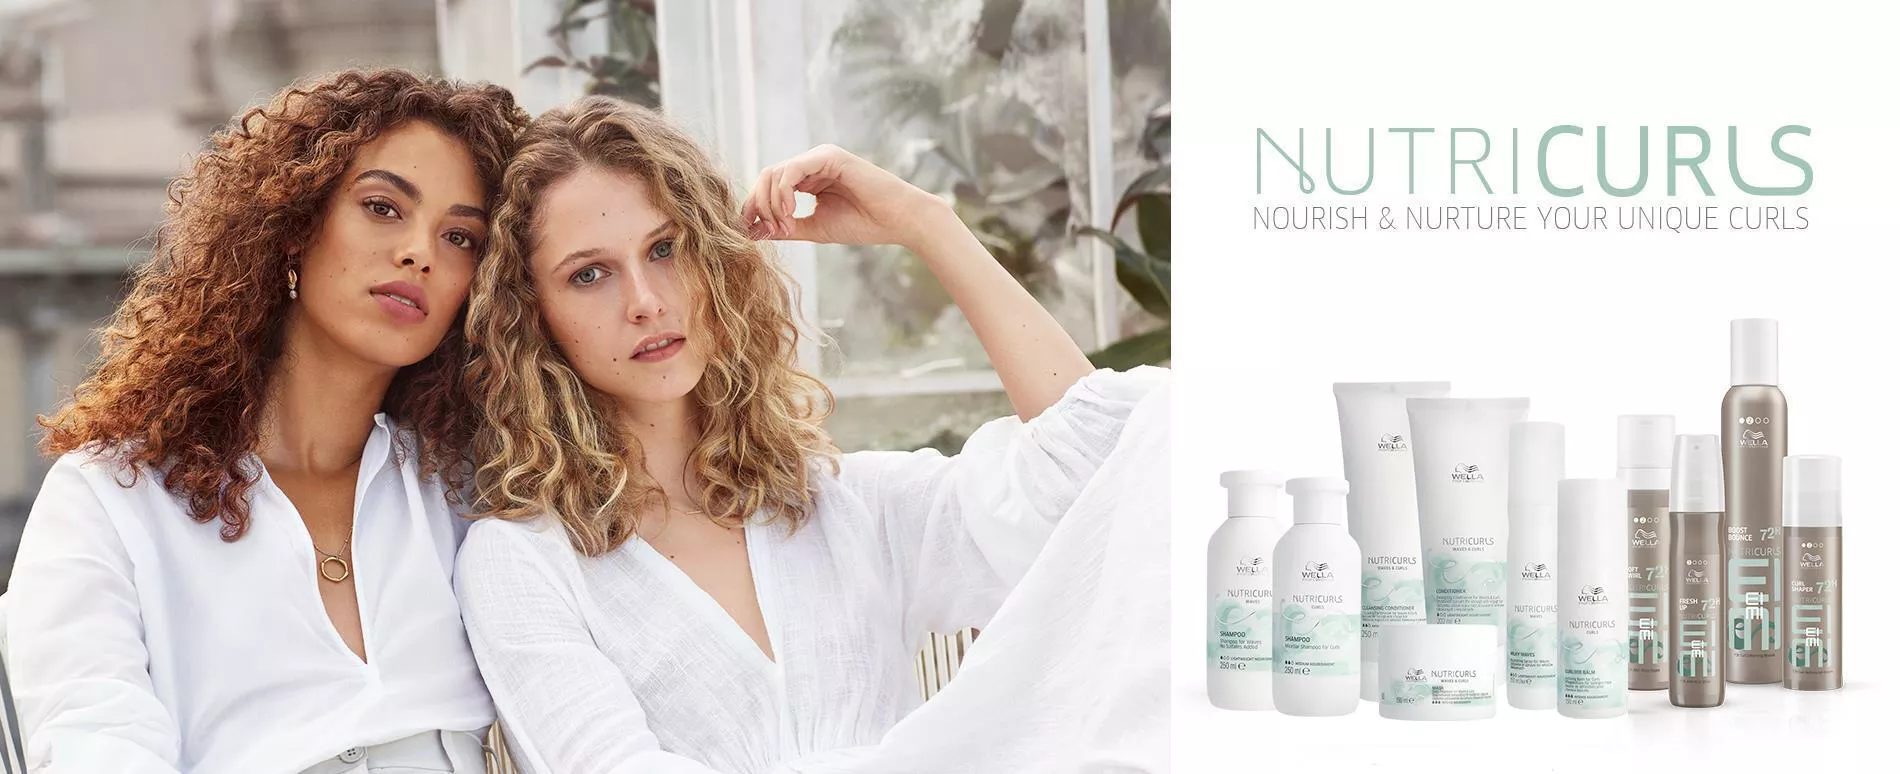 Two women with shoulder-length corkscrew curls in white clothes, sitting together, plus NUTRICURLS product bottles